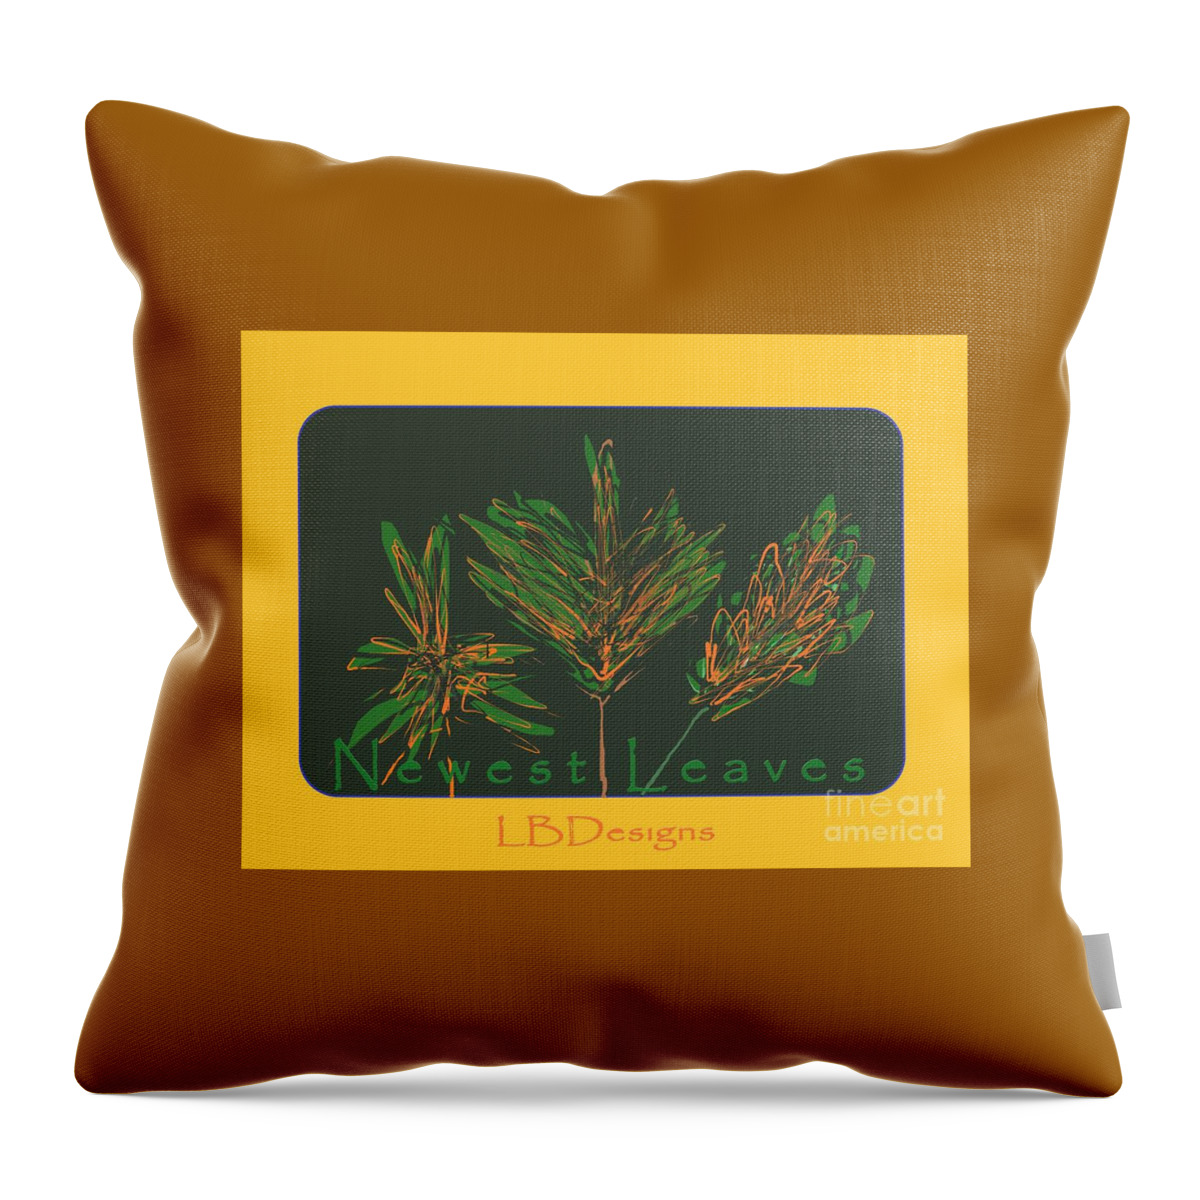 “arts And Design”; Gallery; Images; Ancient; Celebrate; Leaves; “pumpkins And Pottery”; “modern Minimalism”; “abstract And Still Life”; Autumn Throw Pillow featuring the digital art Newest Leaves by LBDesigns